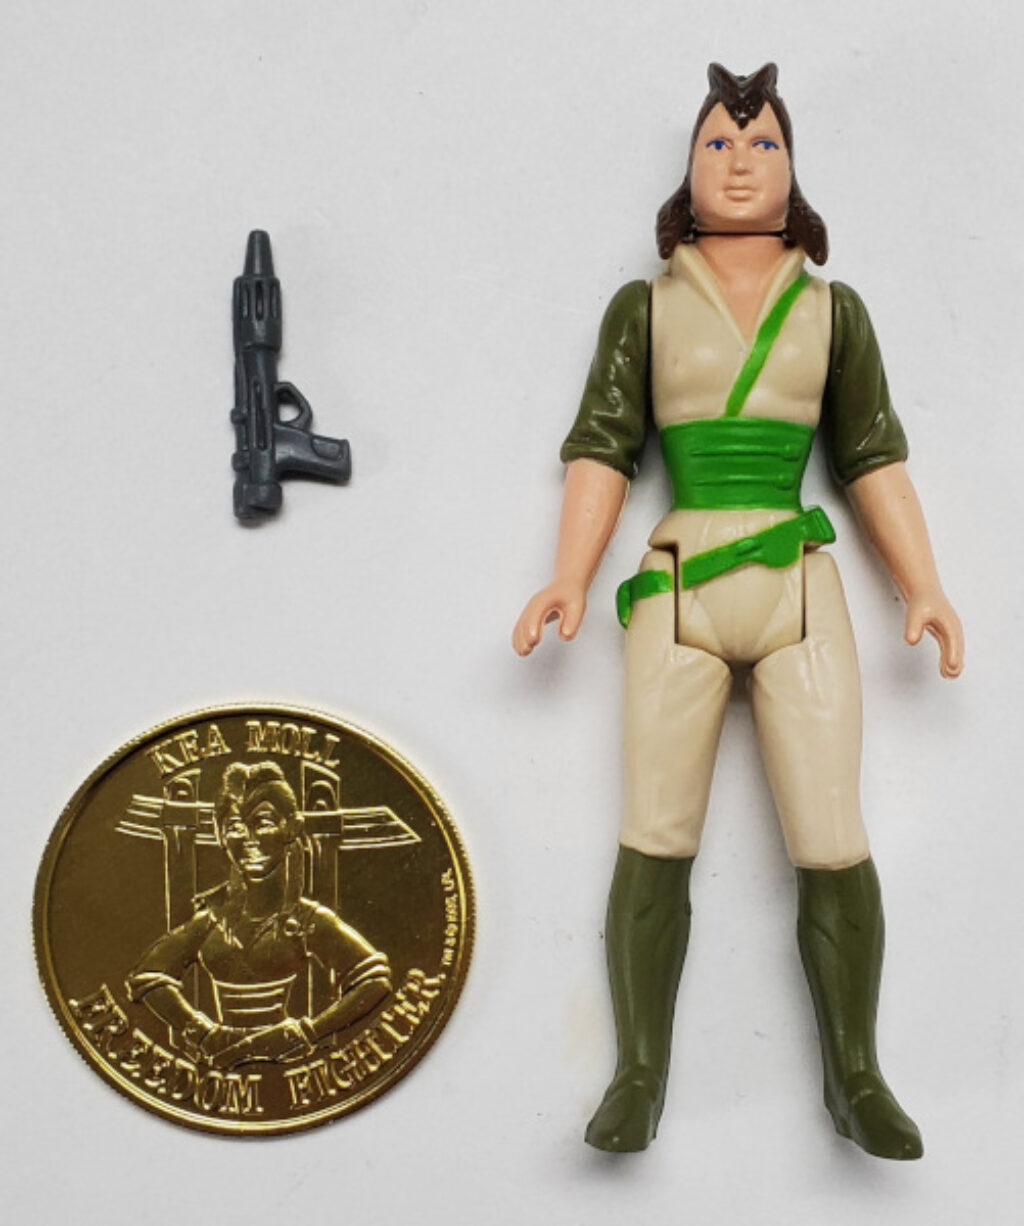 NM 1985 Kenner Star Wars Droids Kea Moll with Coin and Blaster 1